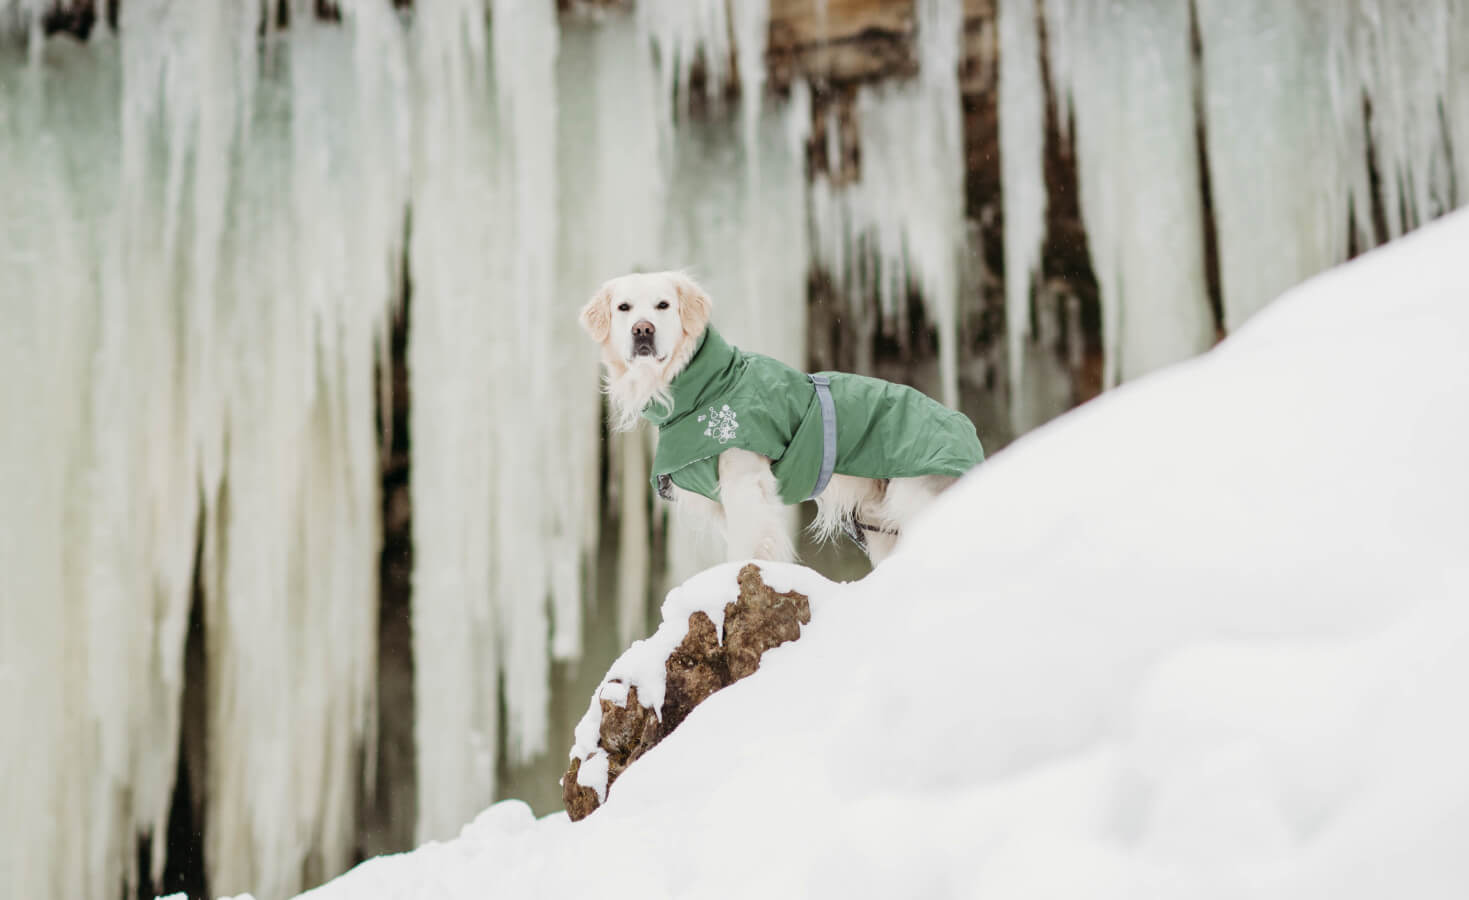 A golden retriever wearing a green coat stands in the snow in front of a frozen waterfall